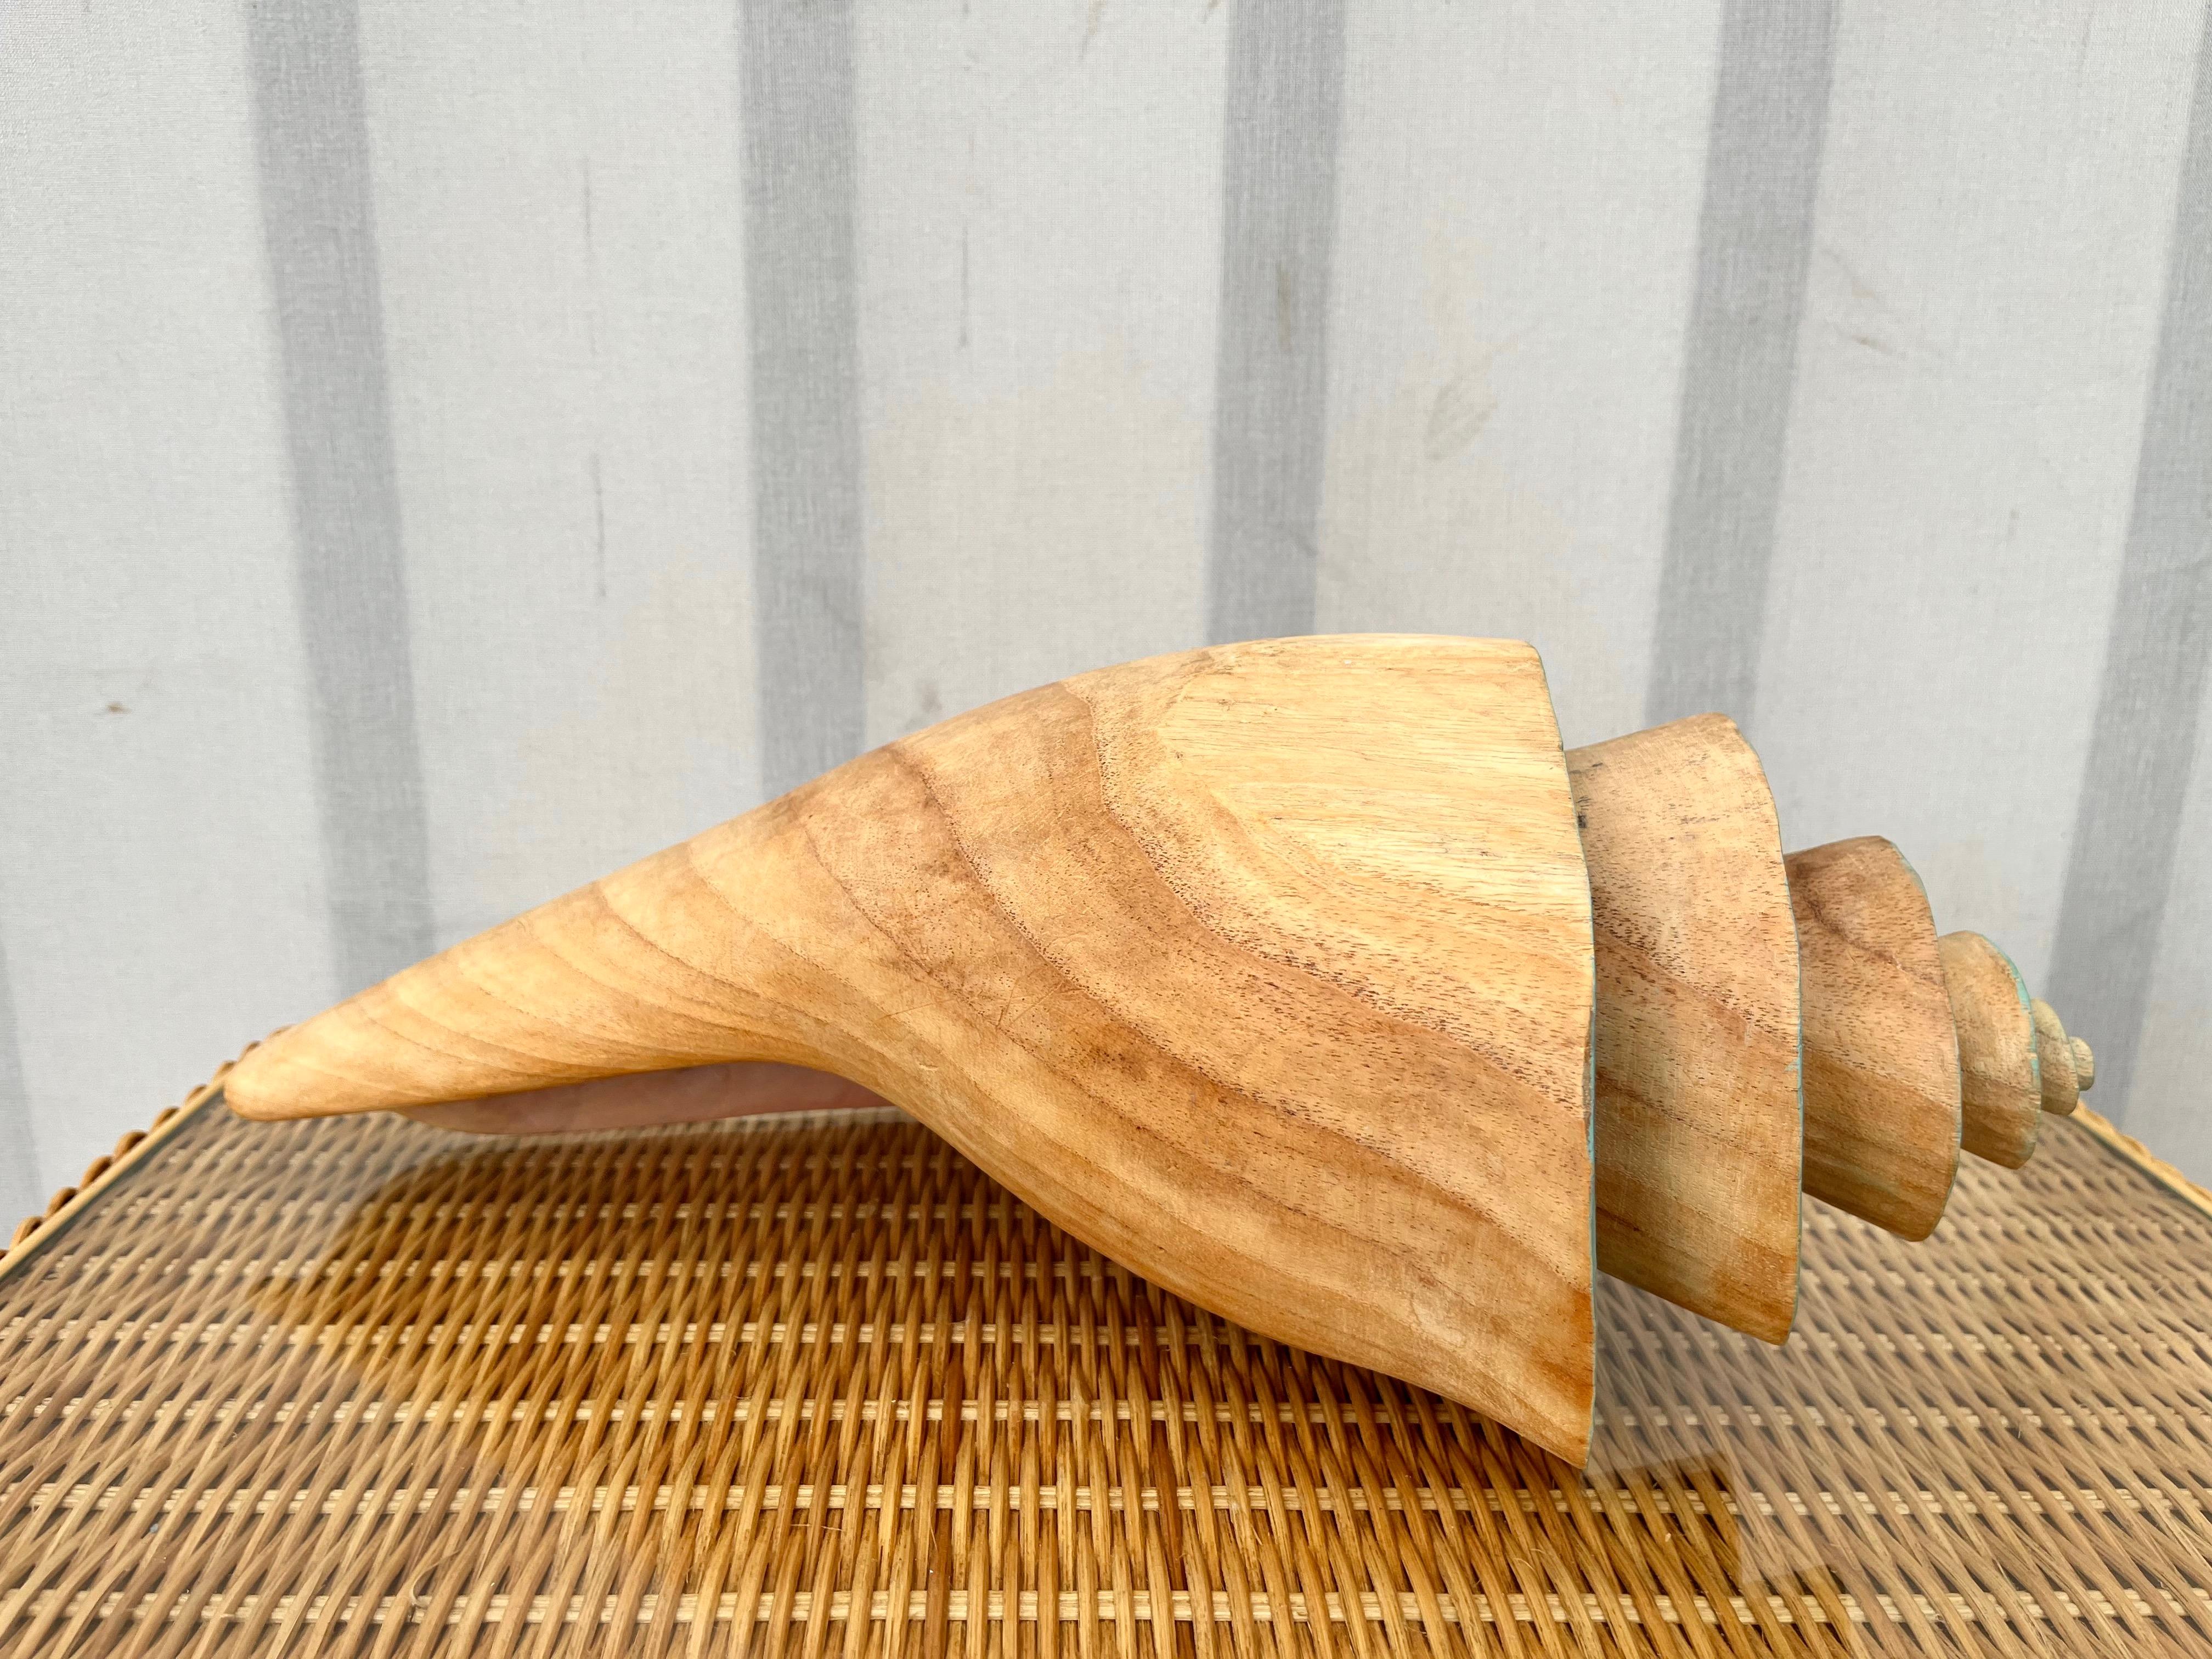 1980s Large Coastal Style Carved Wood Conch Seashell Sculpture.  1